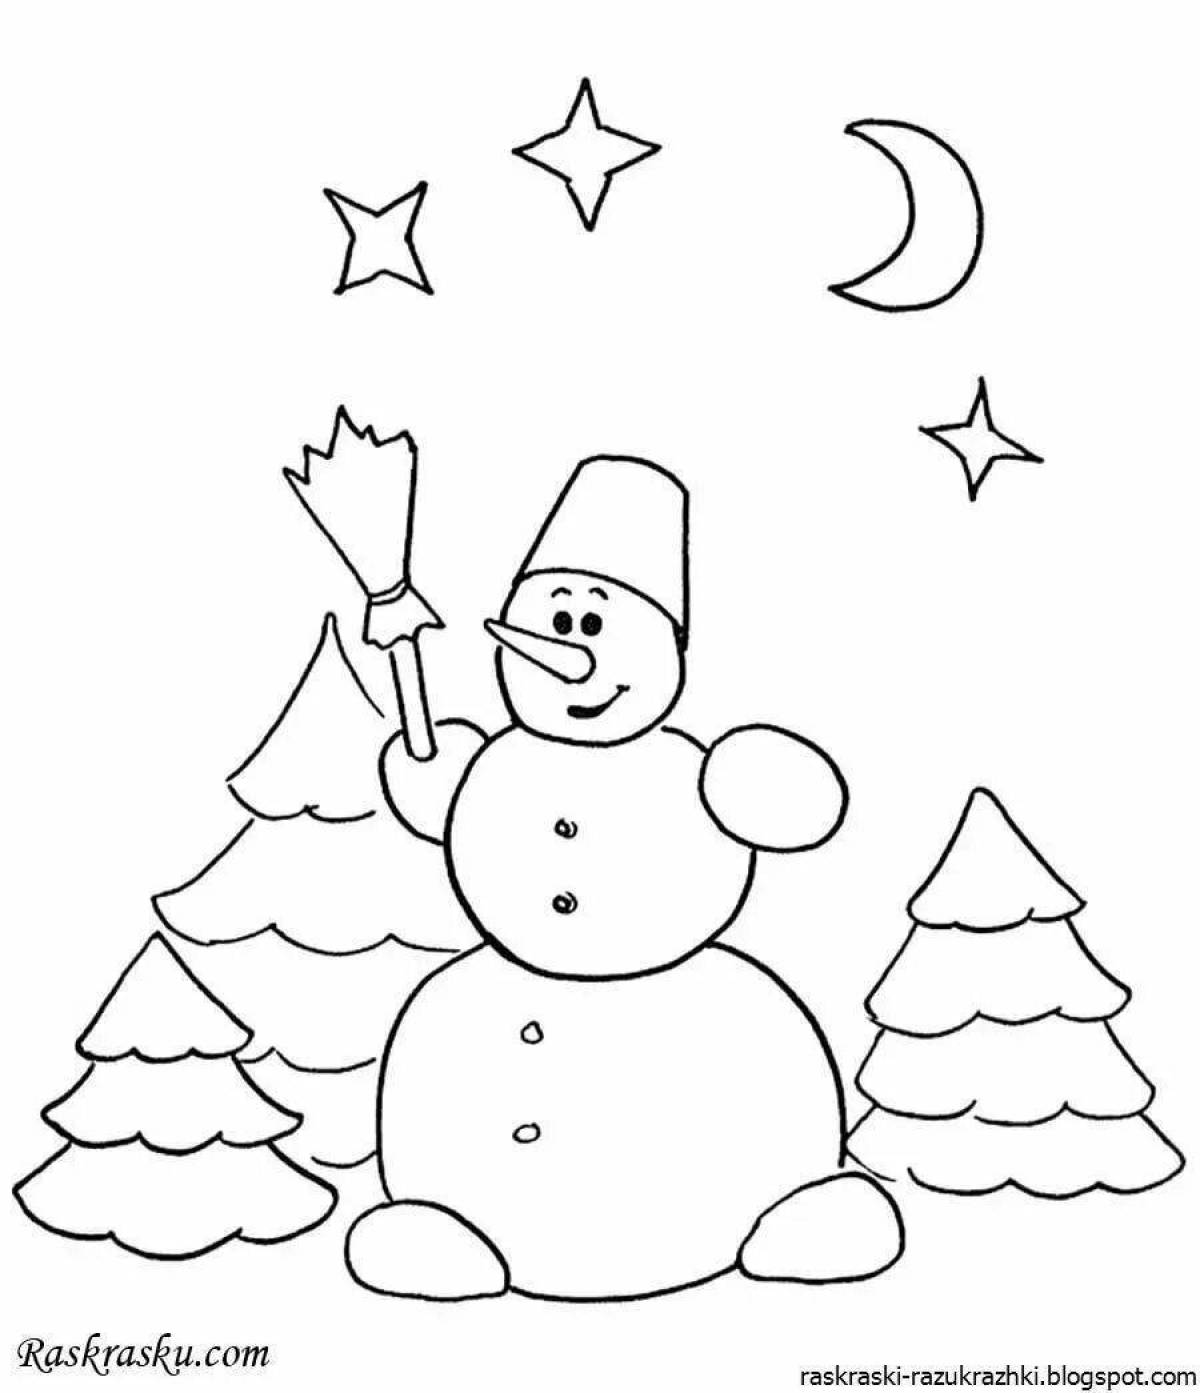 Bright coloring snowman for children 6-7 years old